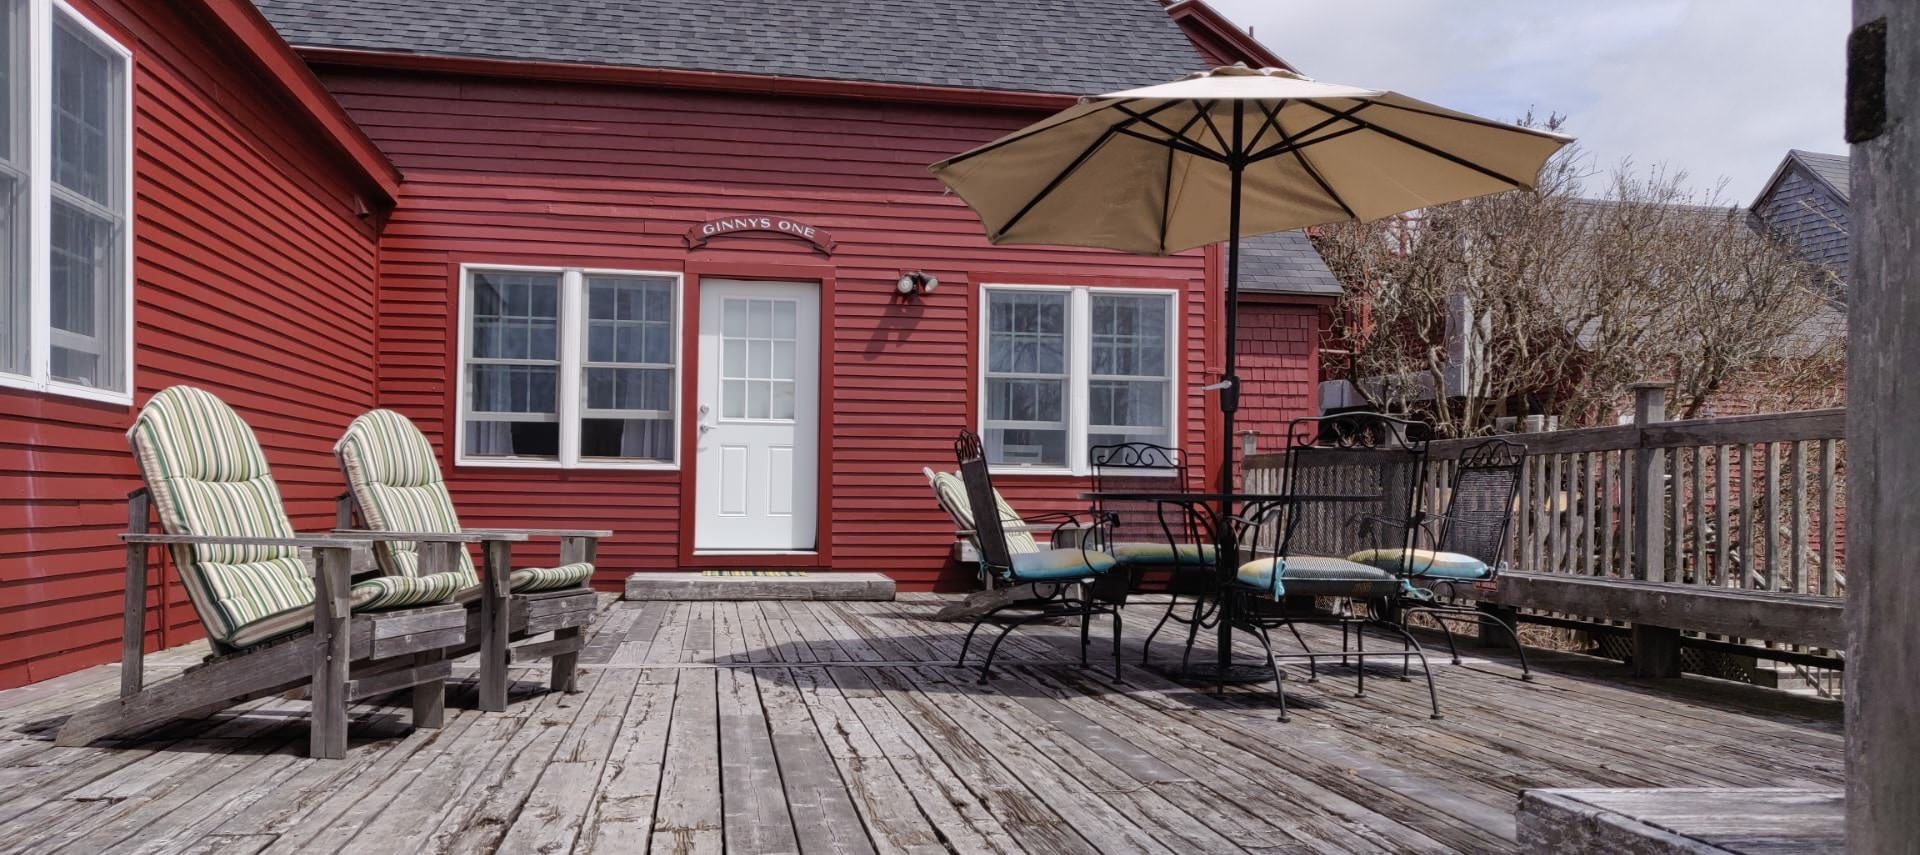 Large wooden deck with adirondack chairs, patio table, patio chairs, and patio umbrella